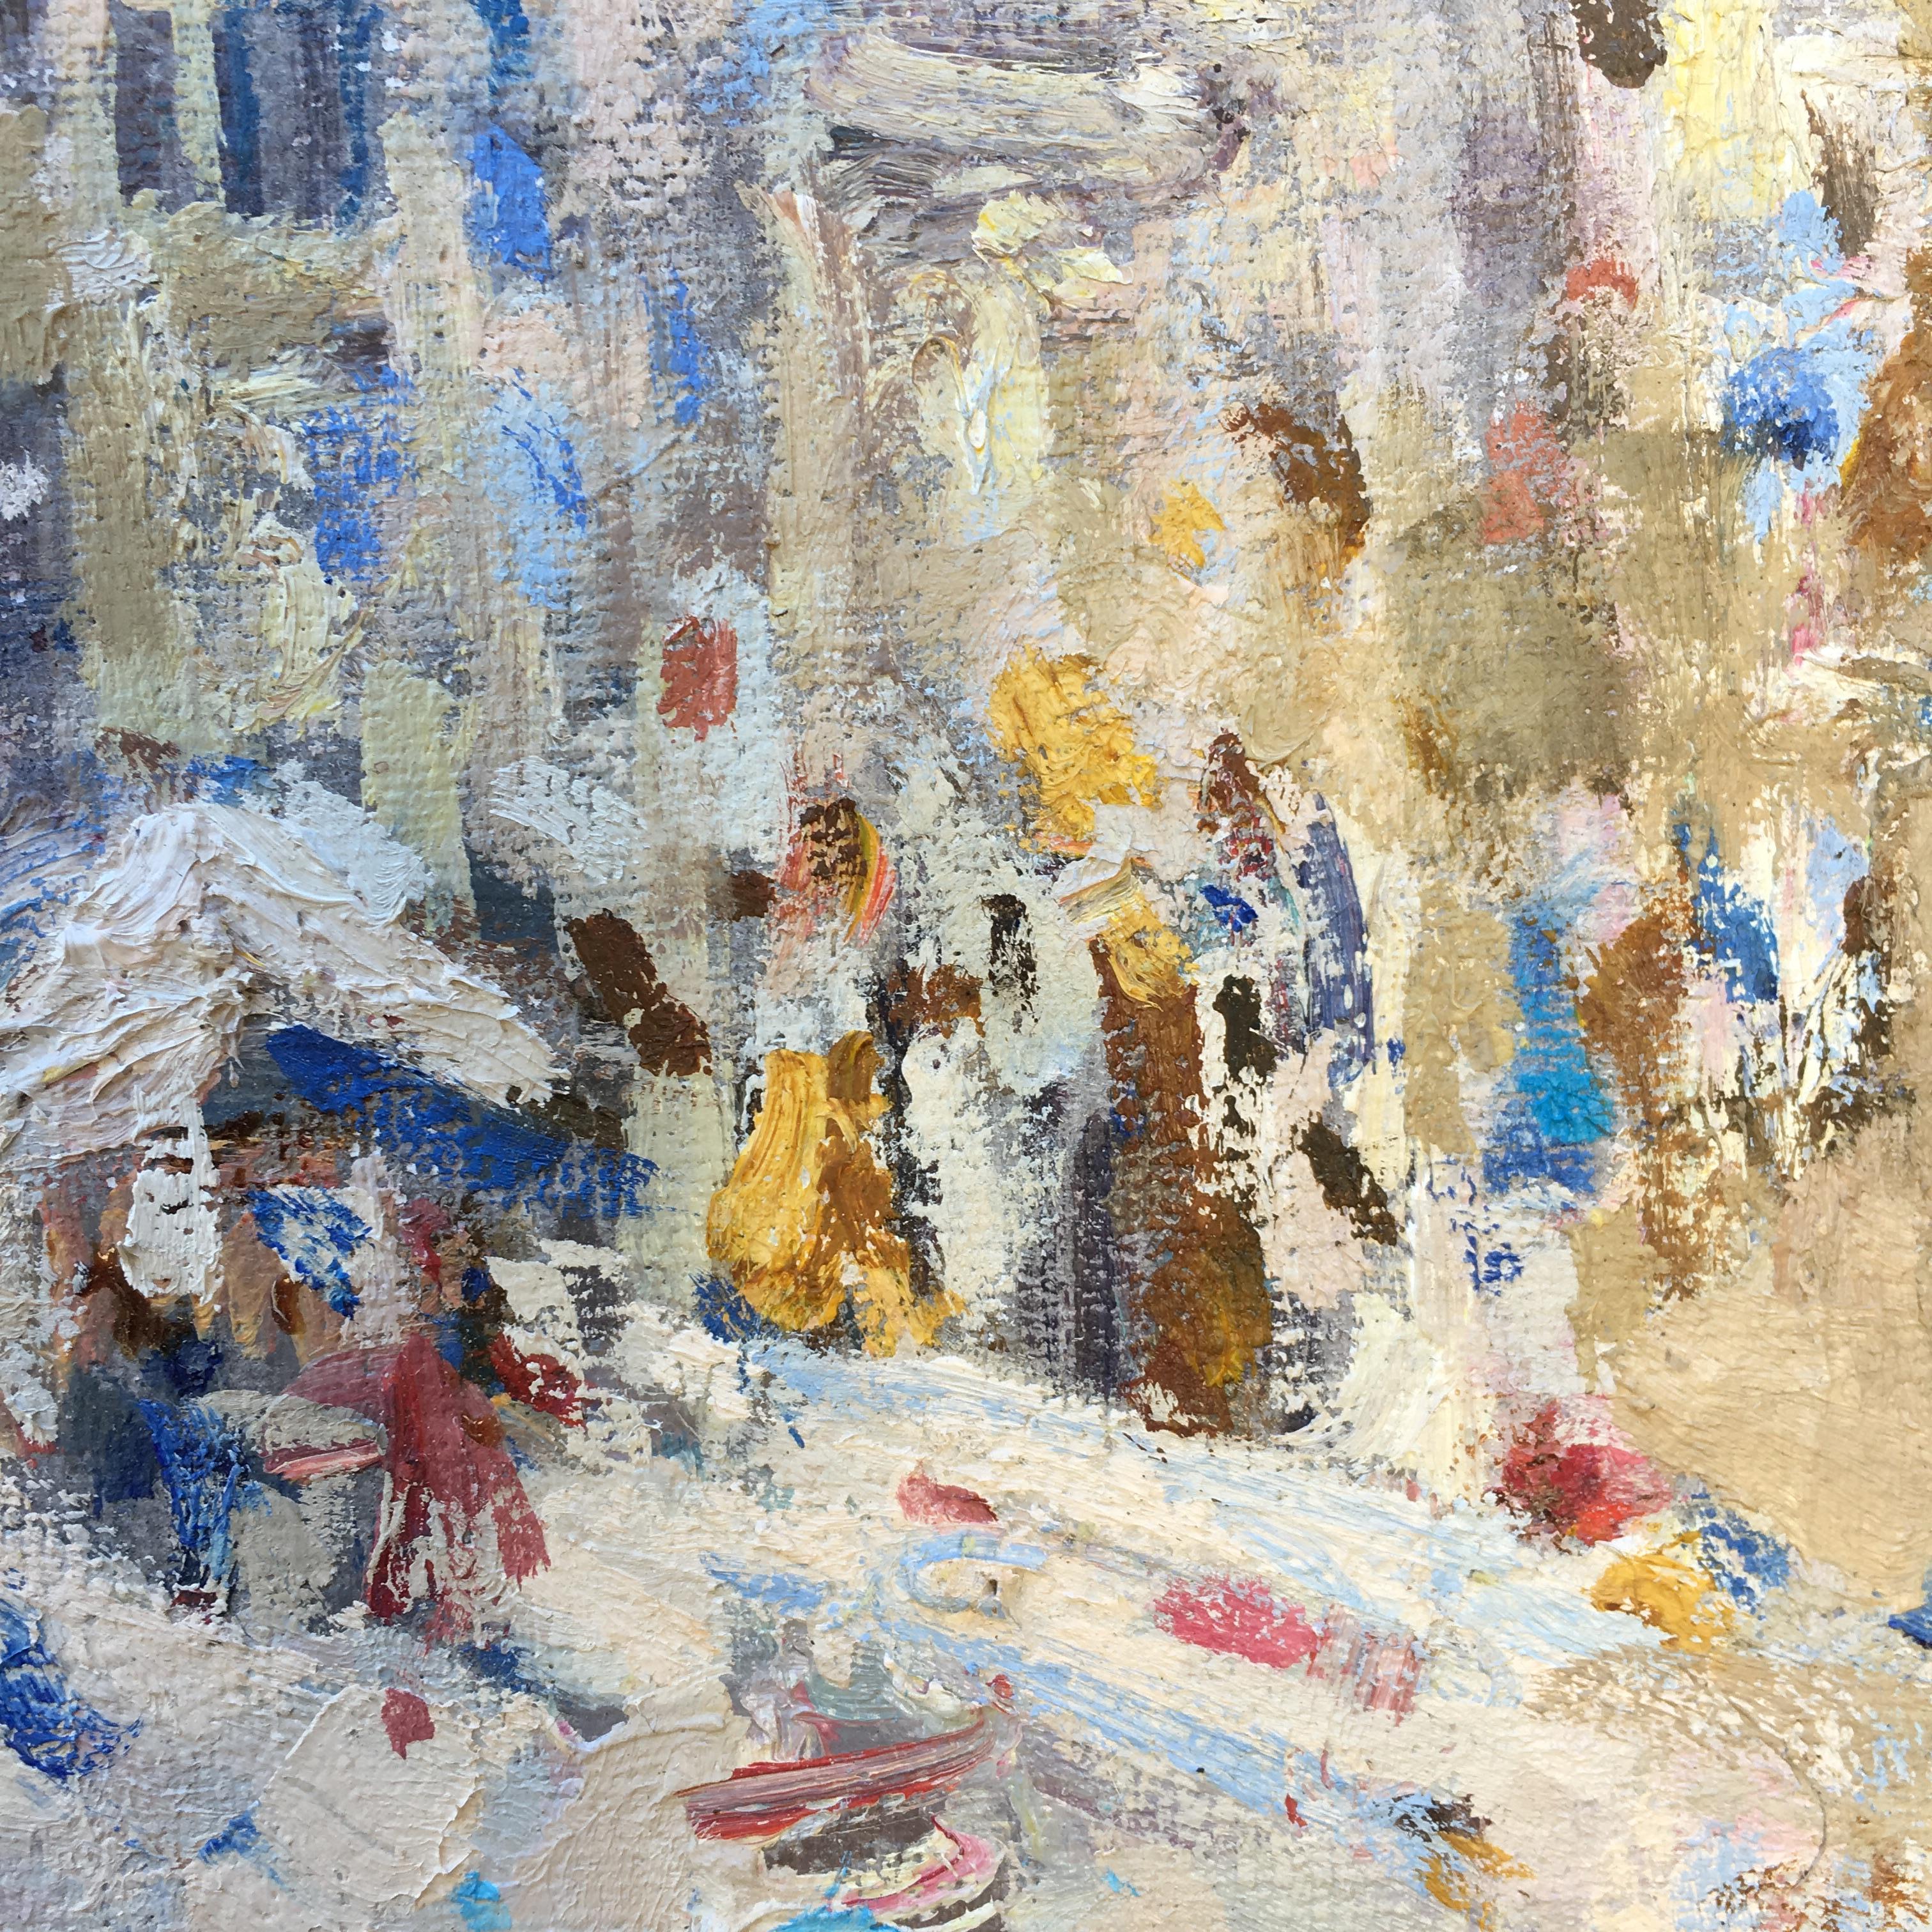 Piazza in Firenze - Gray Figurative Painting by Valeria Lakrisenko